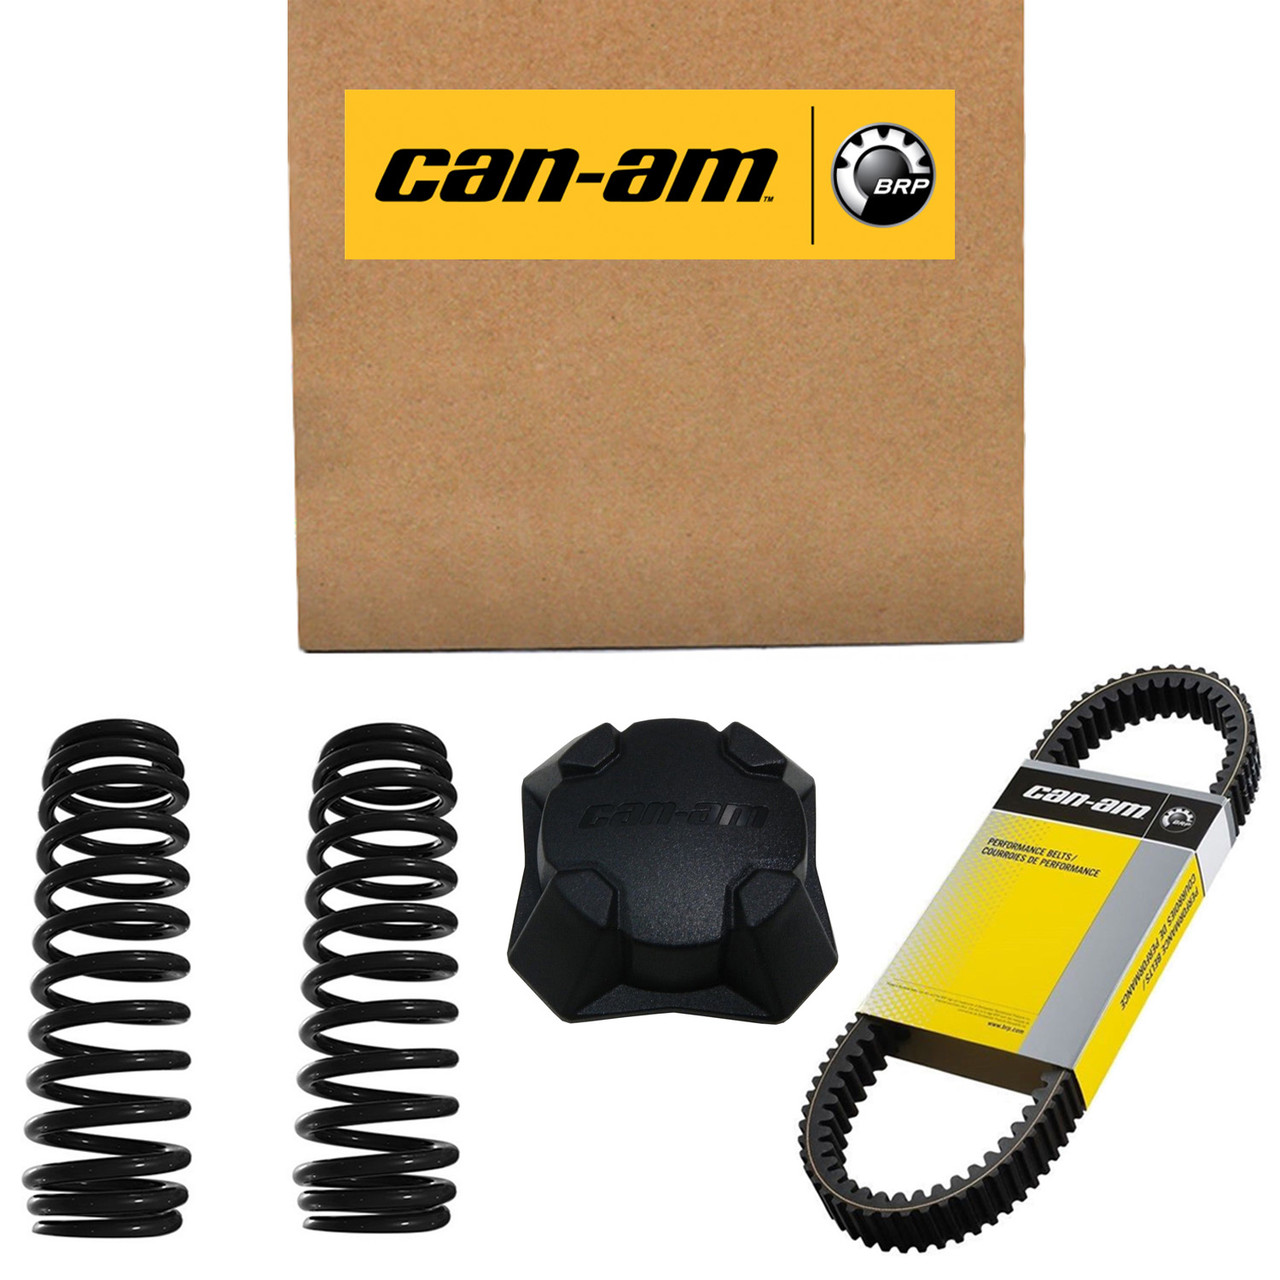 Can-Am New OEM Wiring Harness, 420265956